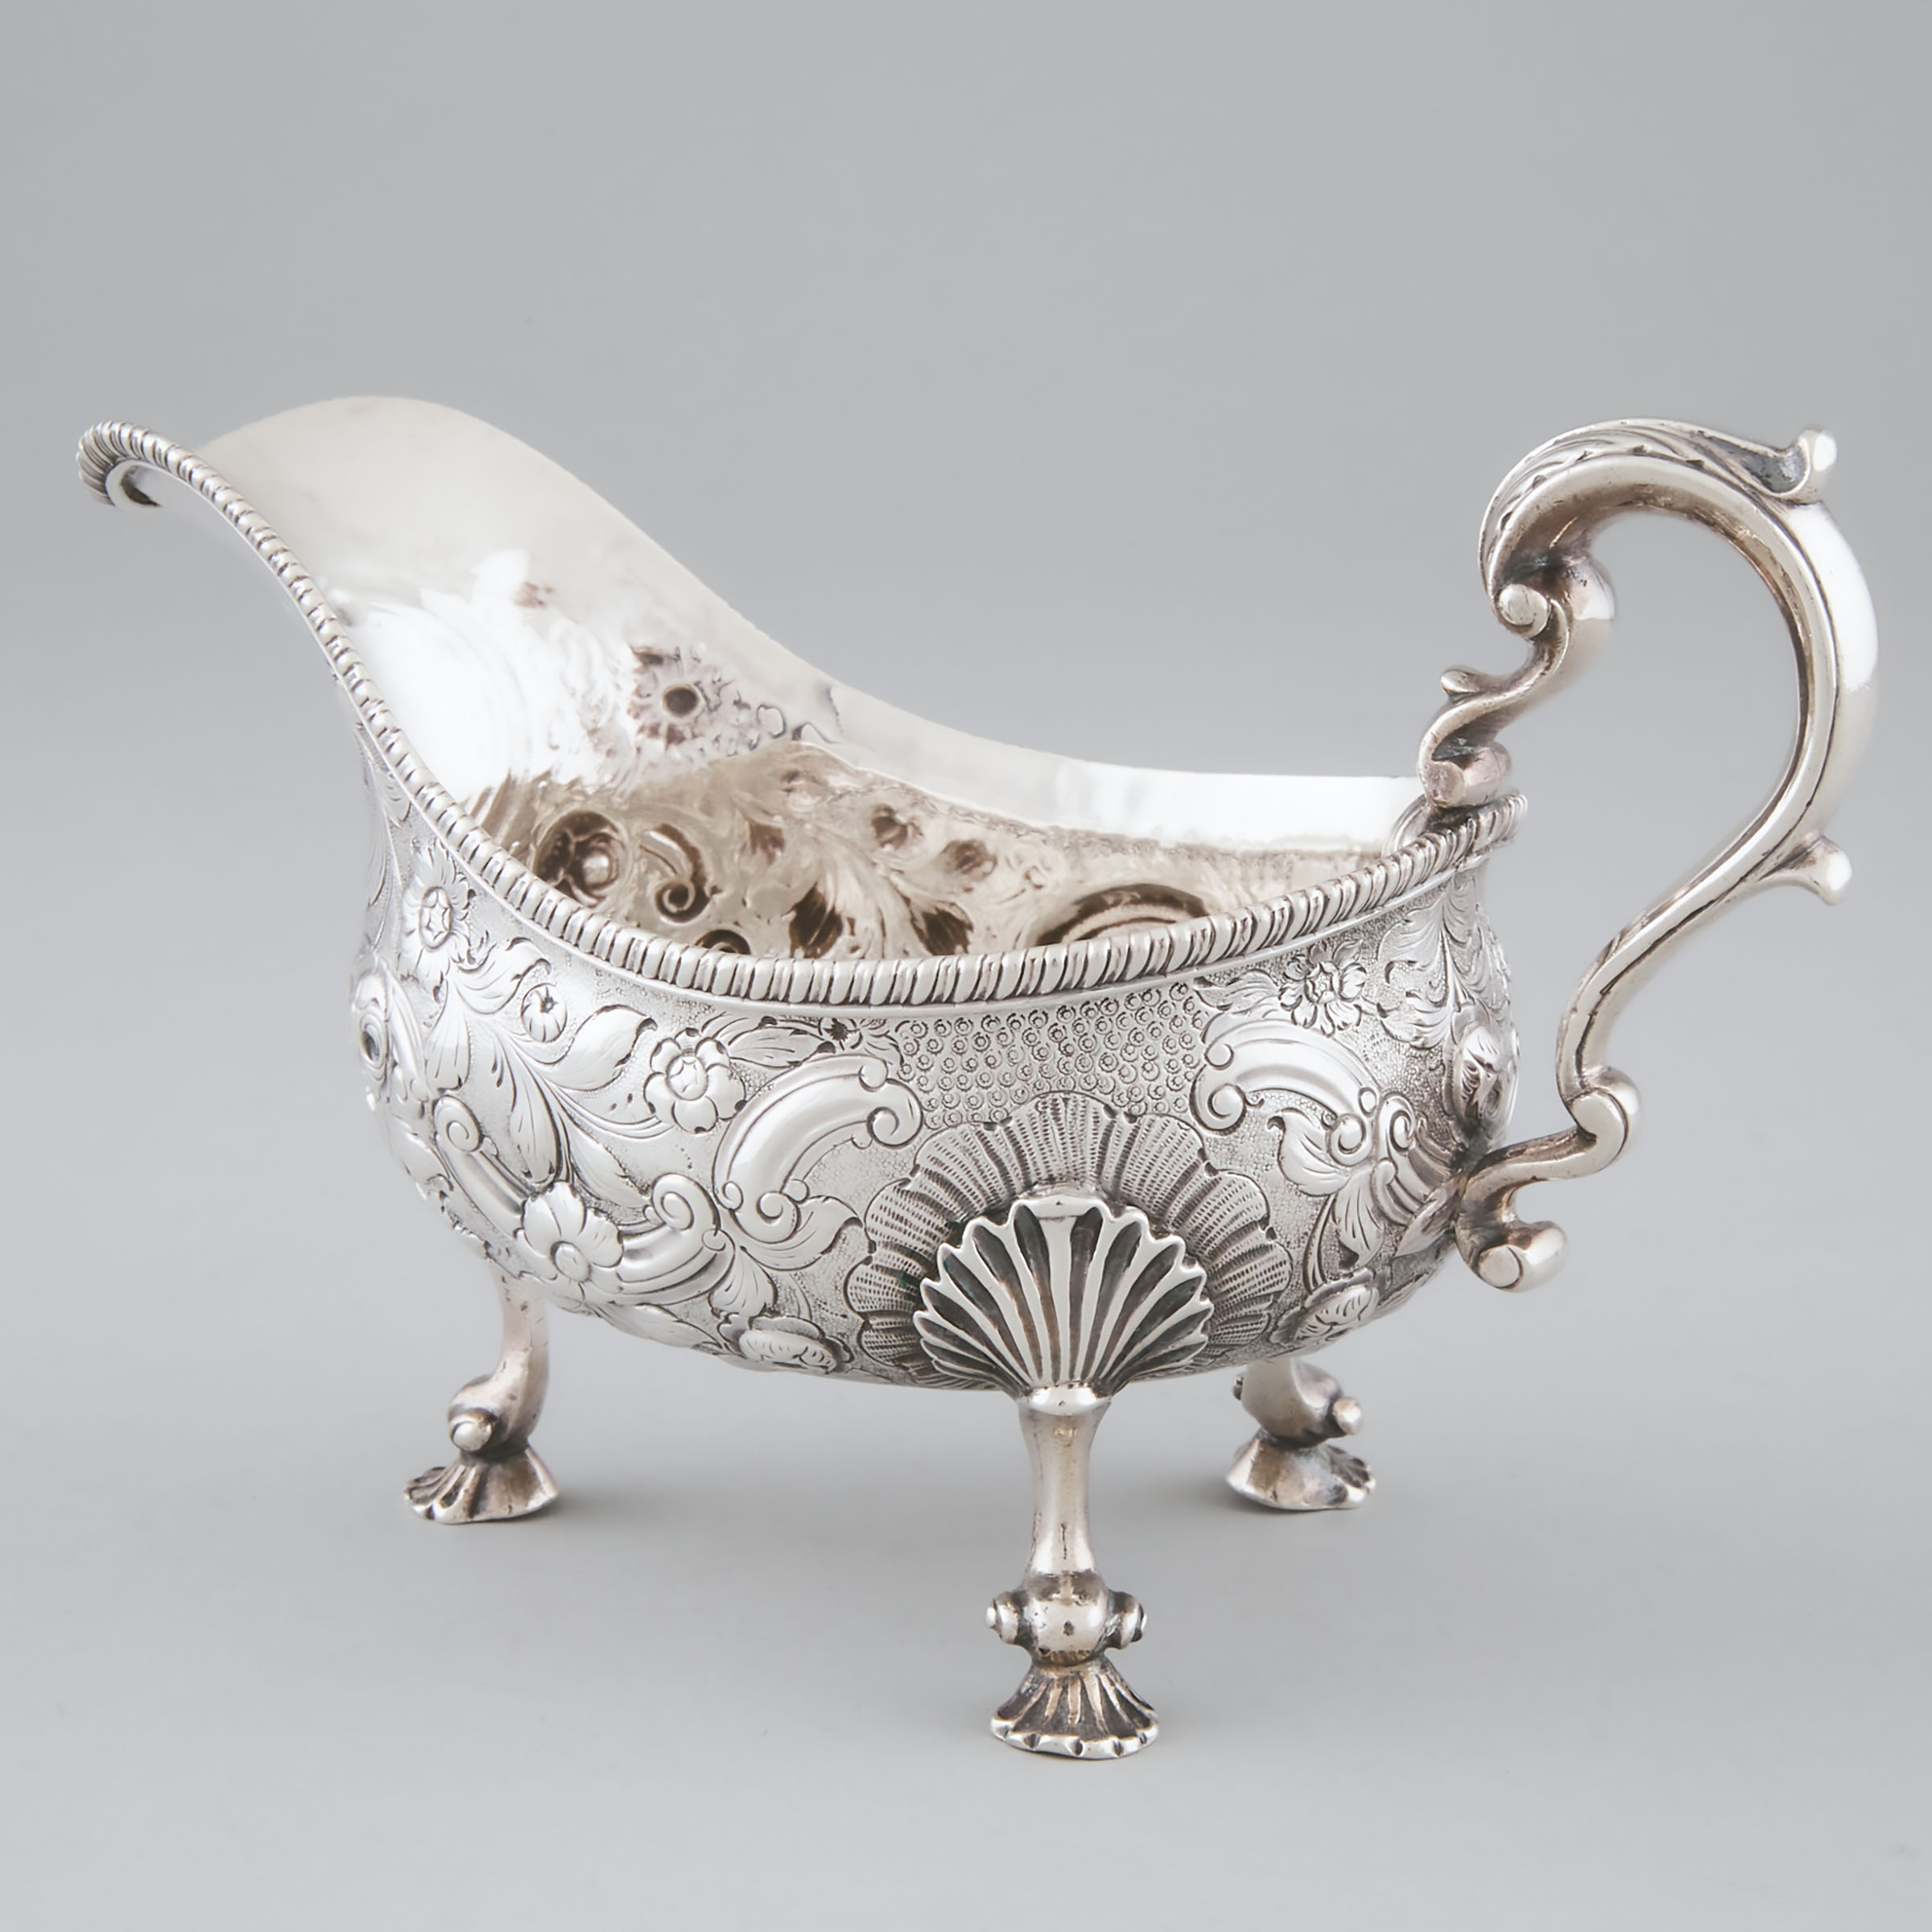 George IV Silver Sauce Boat probably 2a566d